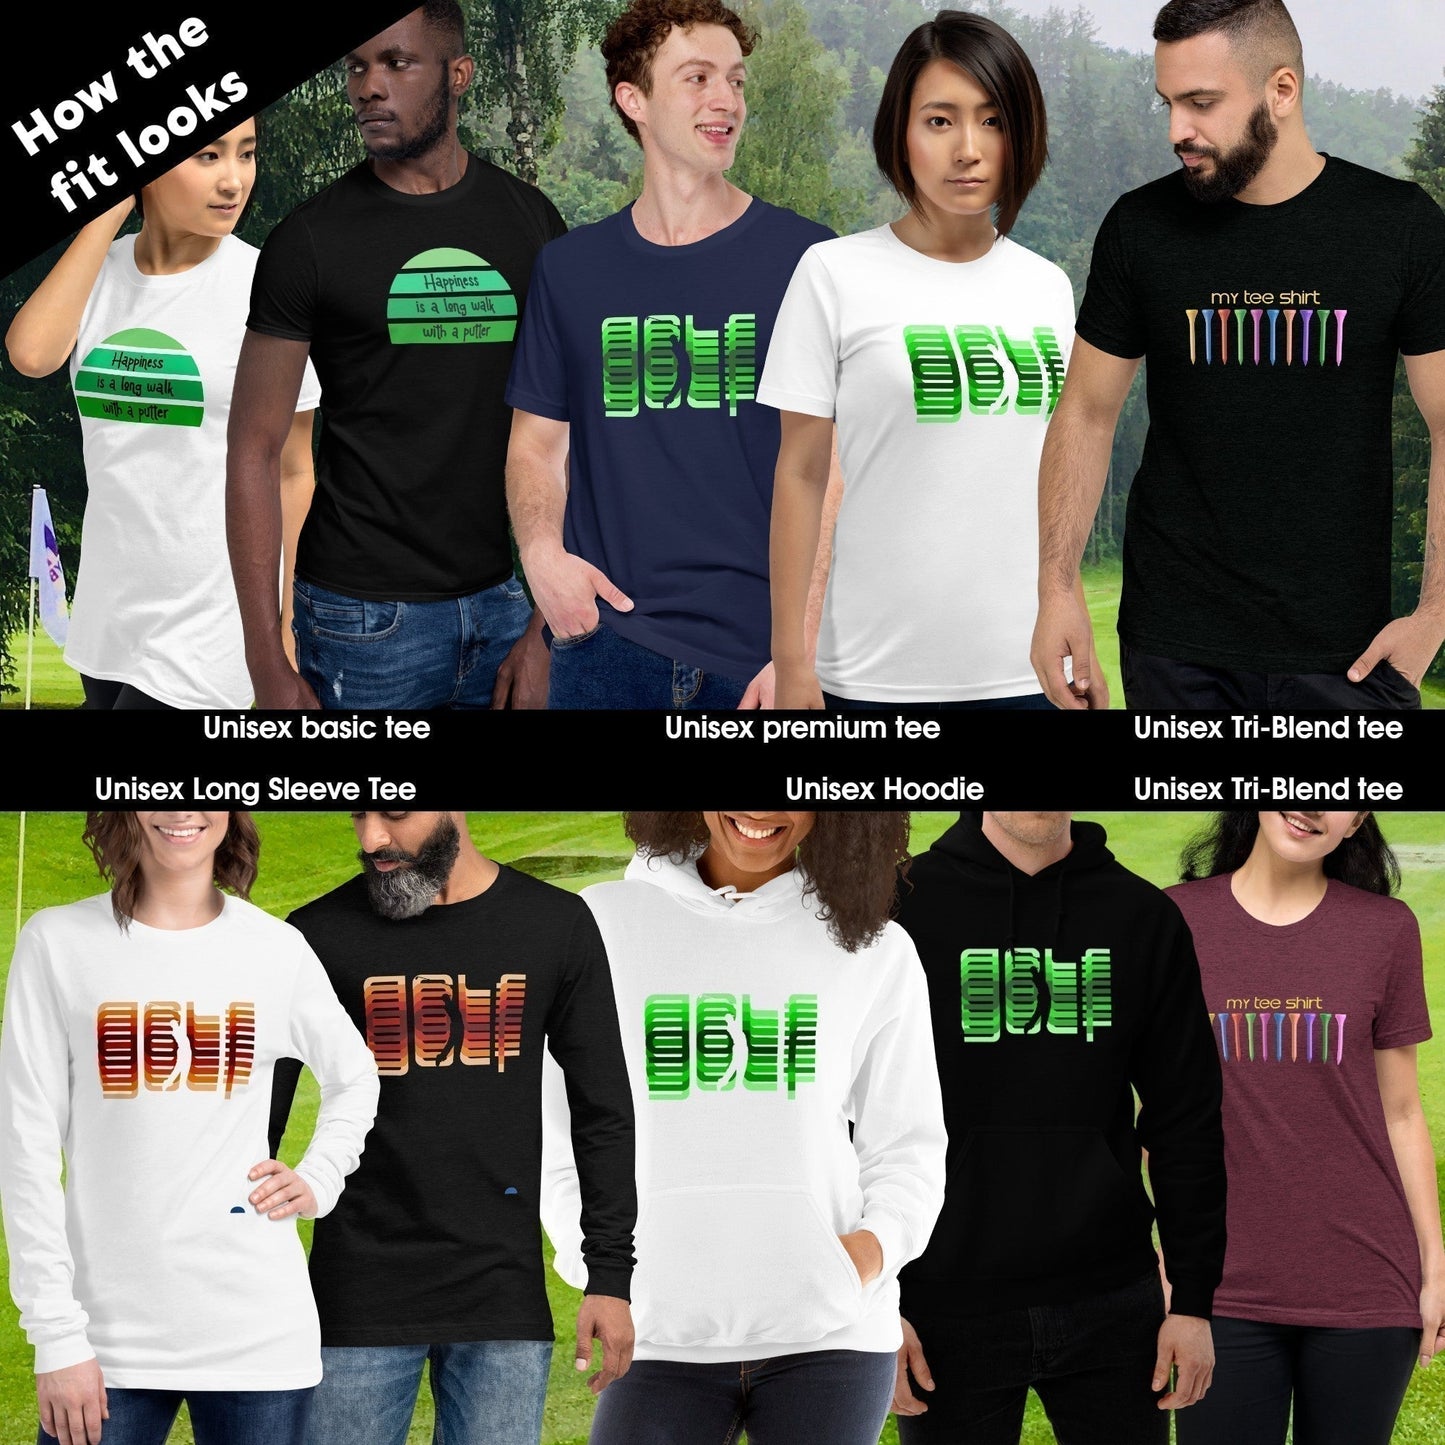 Golf Swing Golf TShirt and Hoodie is a Creative Golf Graphic design for Men and Women